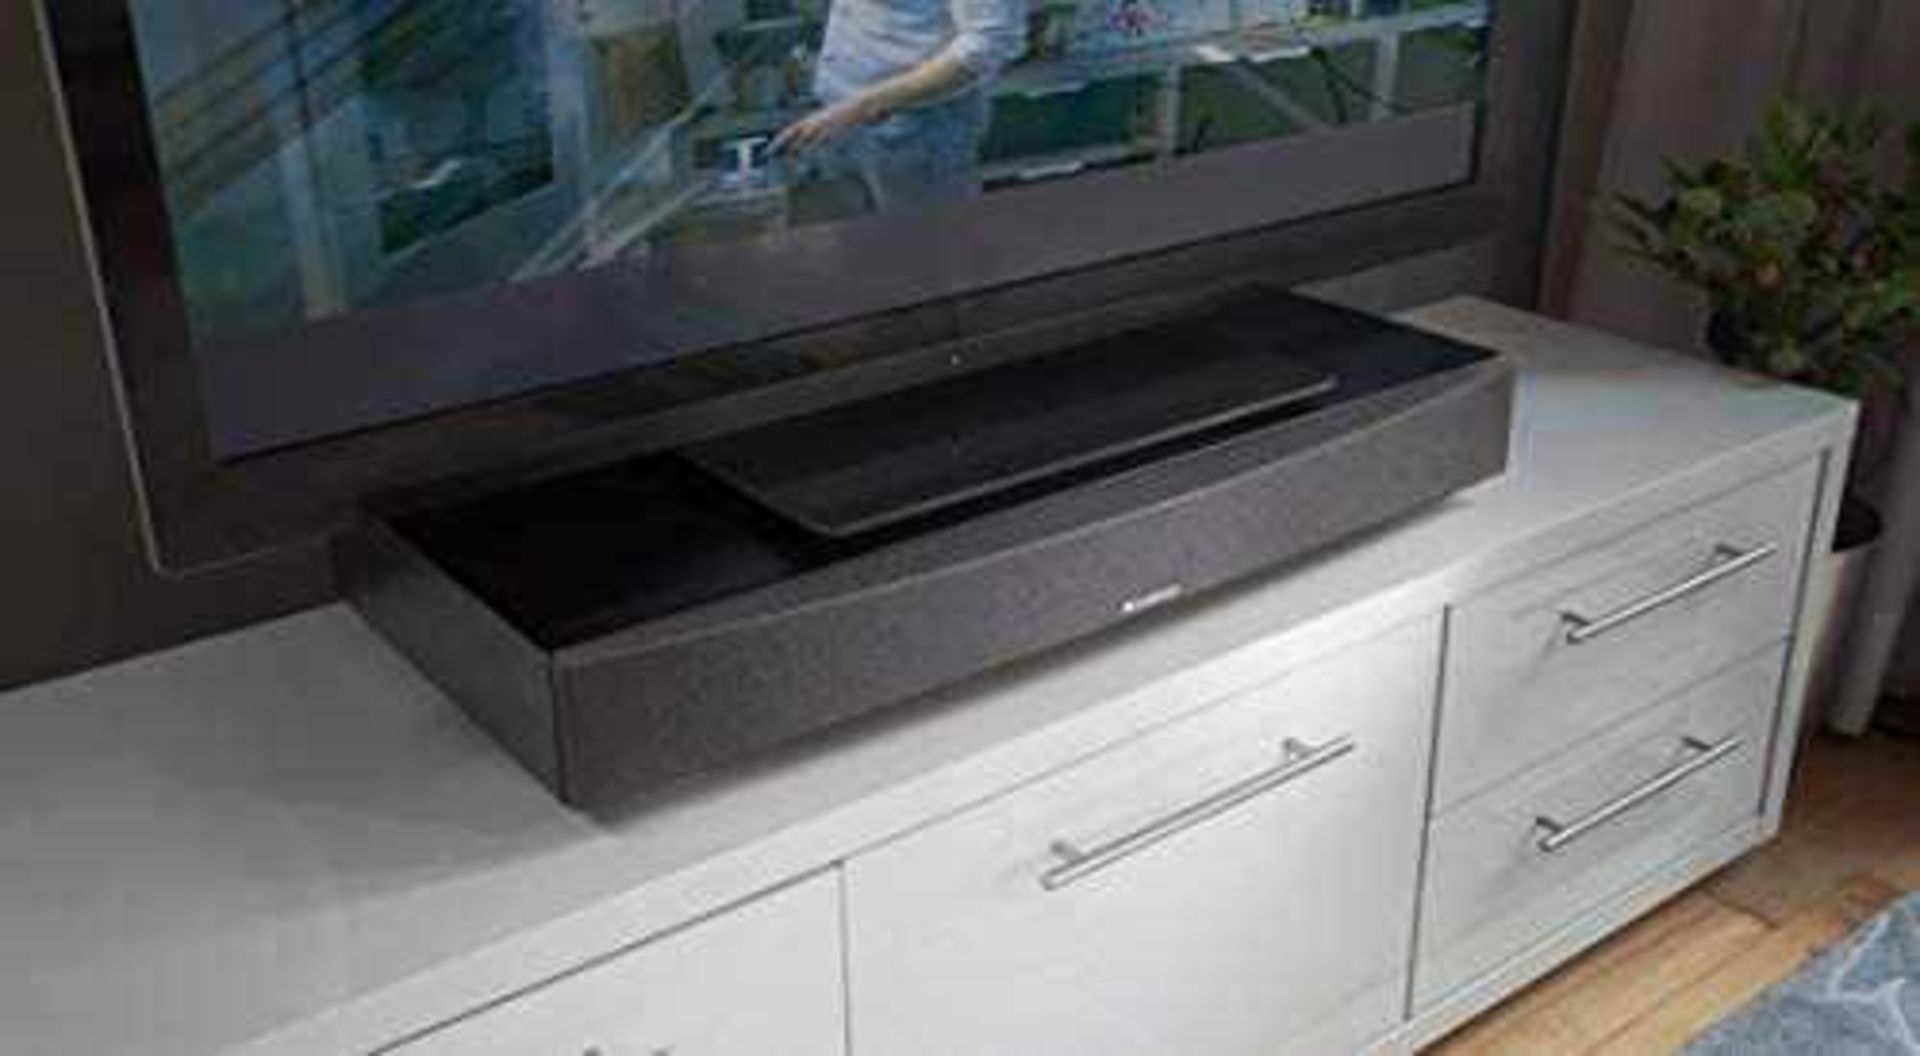 Rrp £250 Boxed Cambridge Audio Tv5 V2 Tv Speaker Base With Bluetooth (Tested & Working) - Image 4 of 4